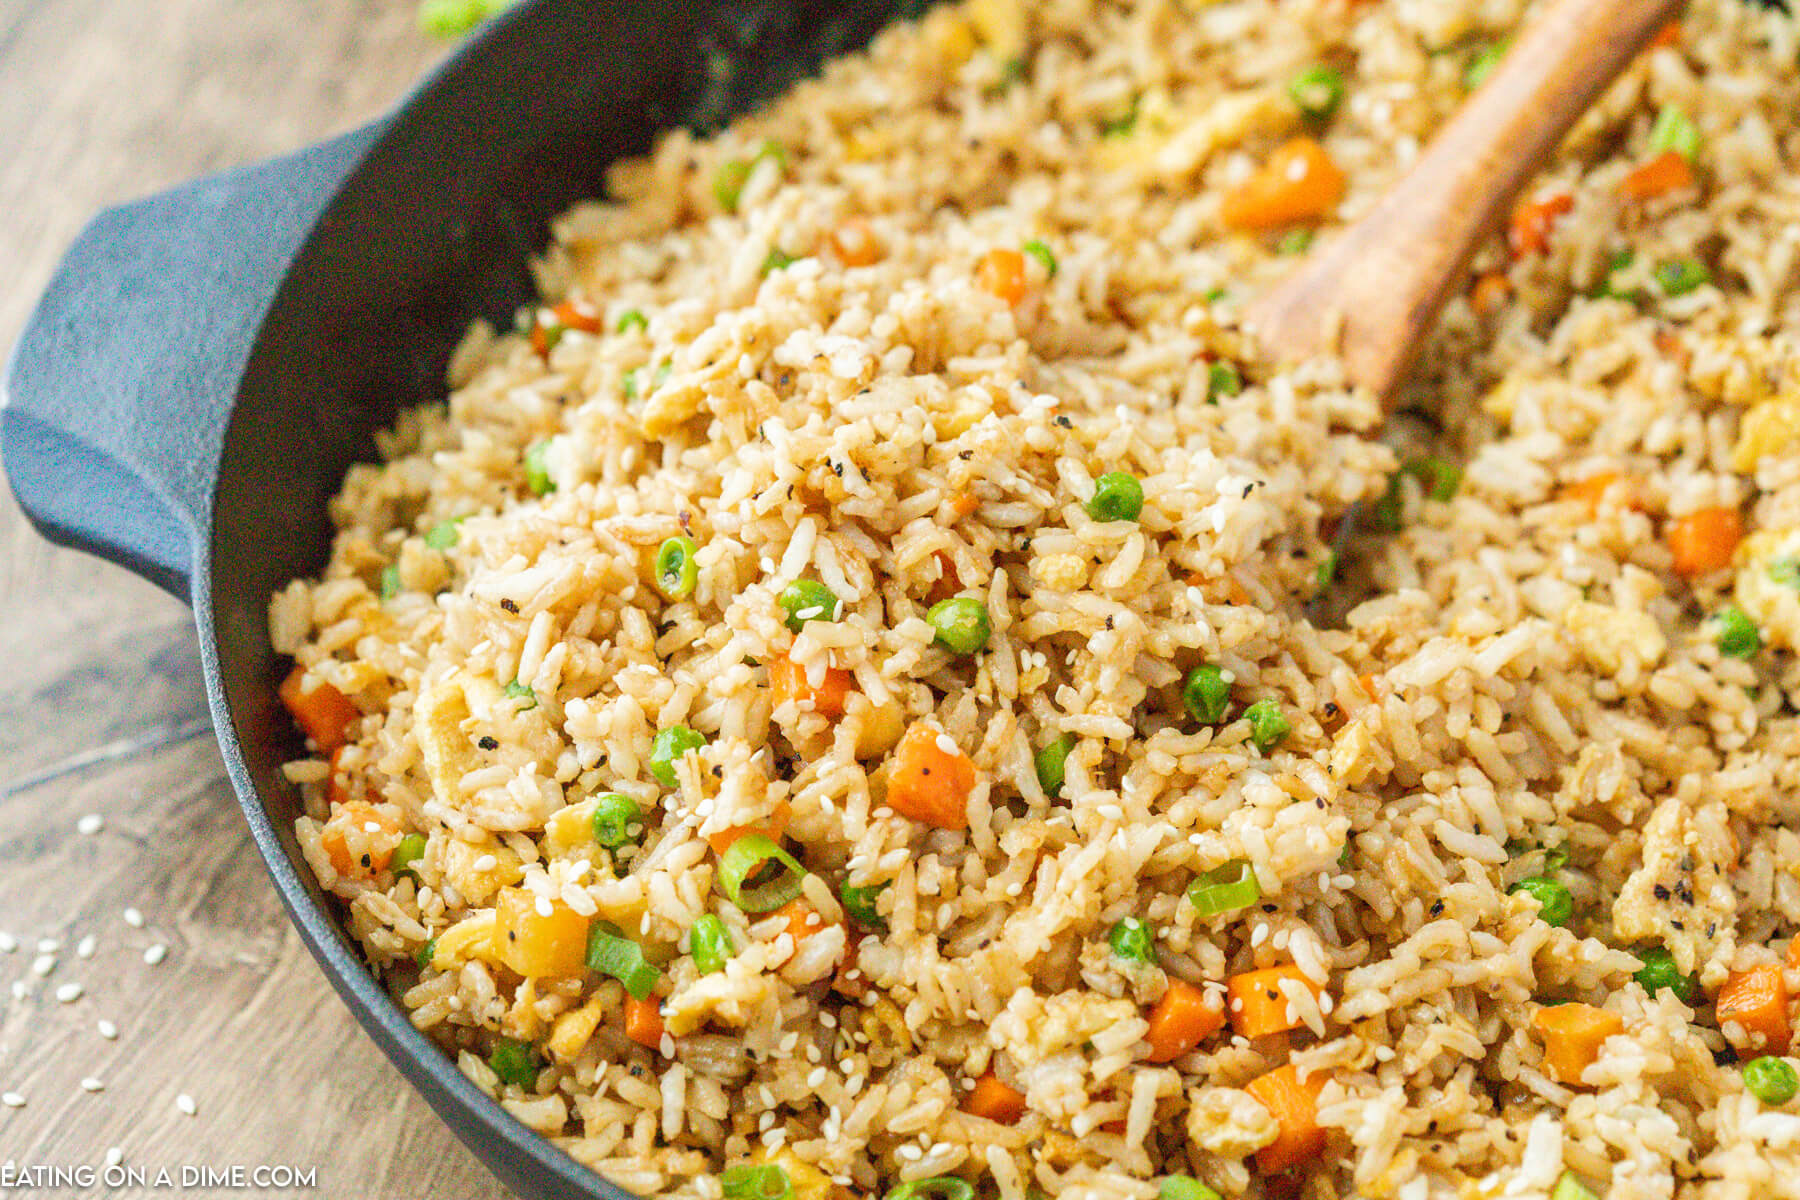 Fried rice in a cast iron skillet in a wooden spoon